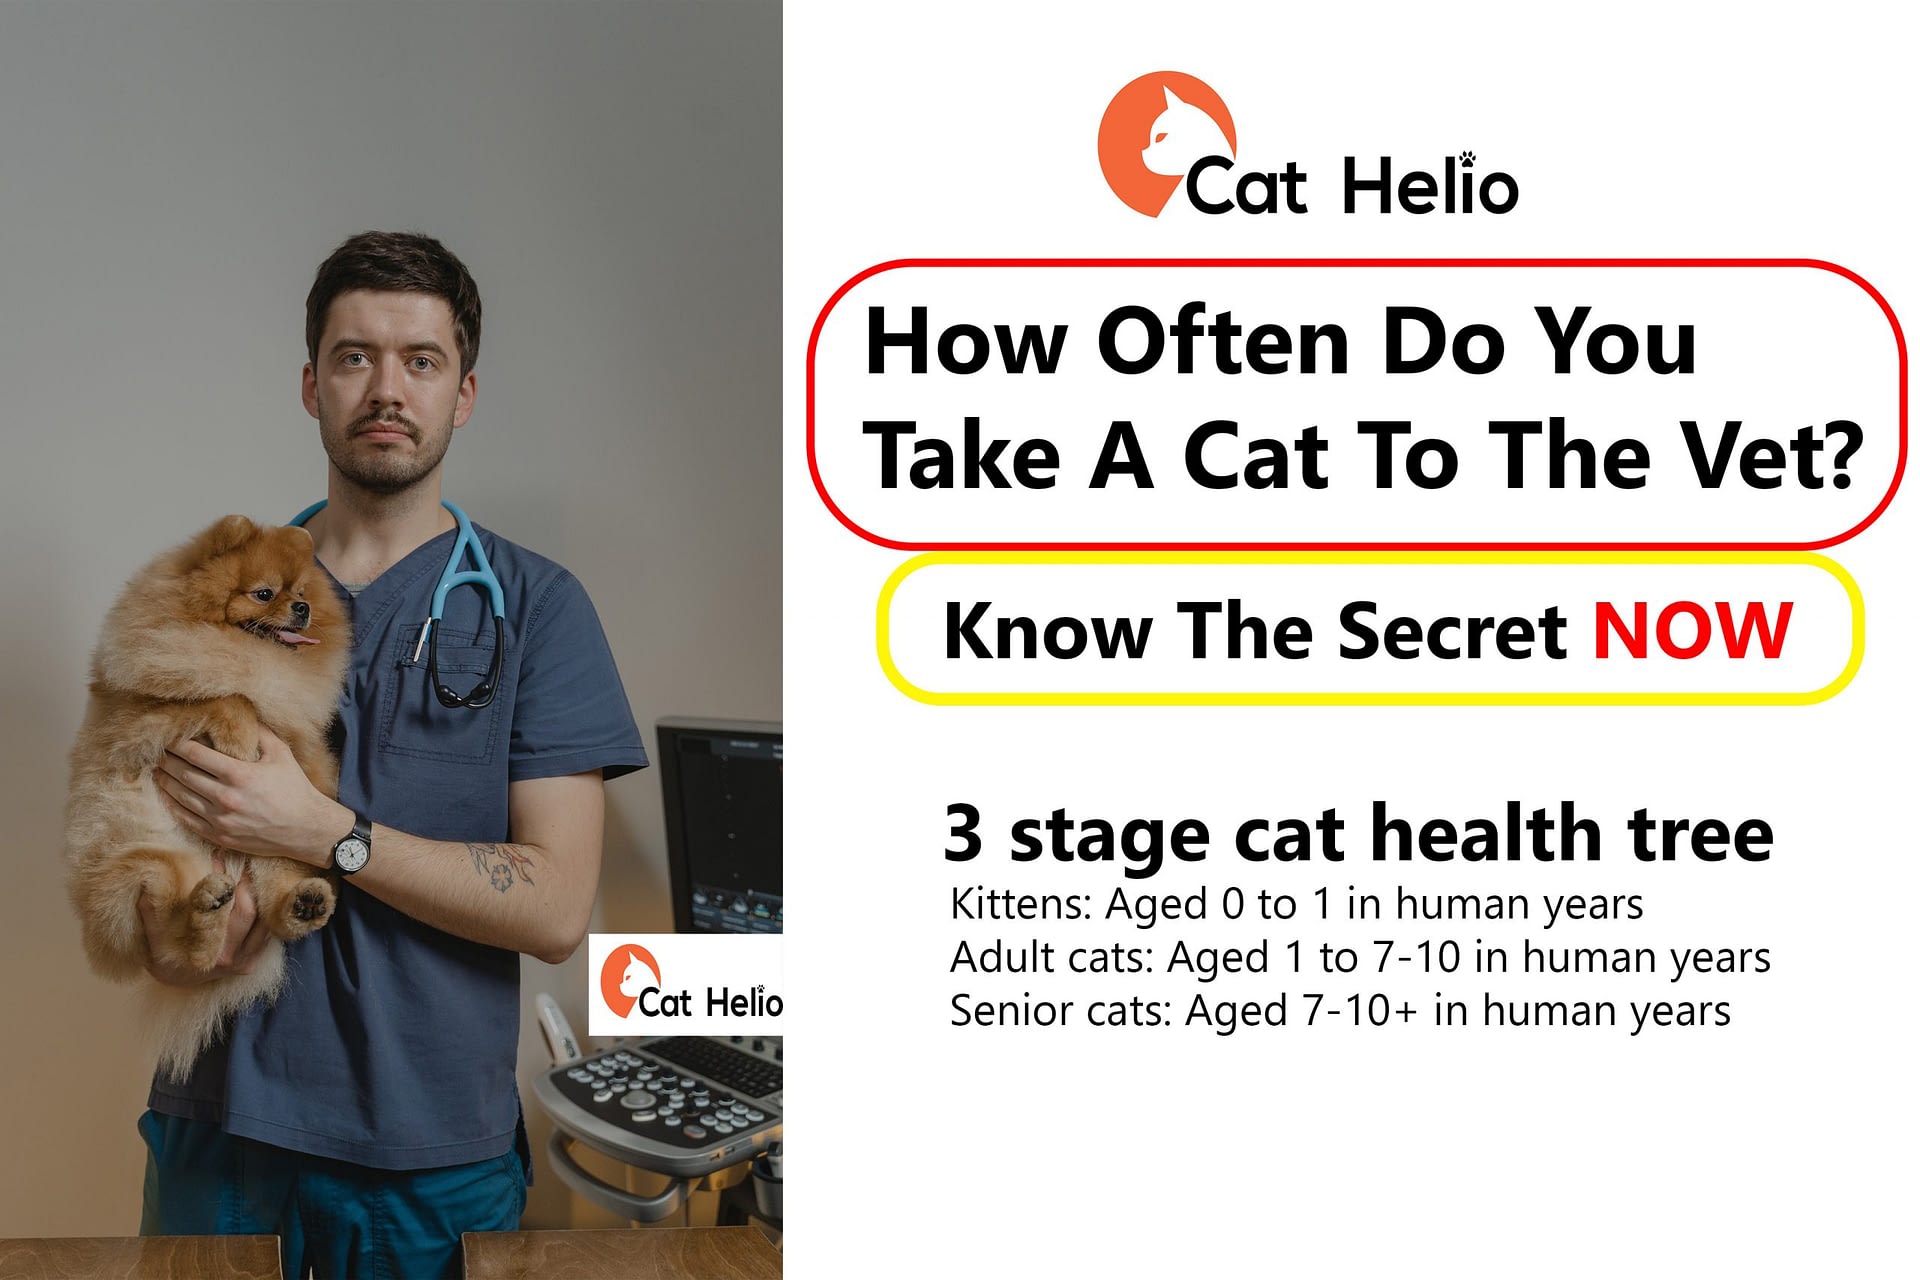 How Often Do You Take A Cat To The Vet? Know the secrete Cat Helio